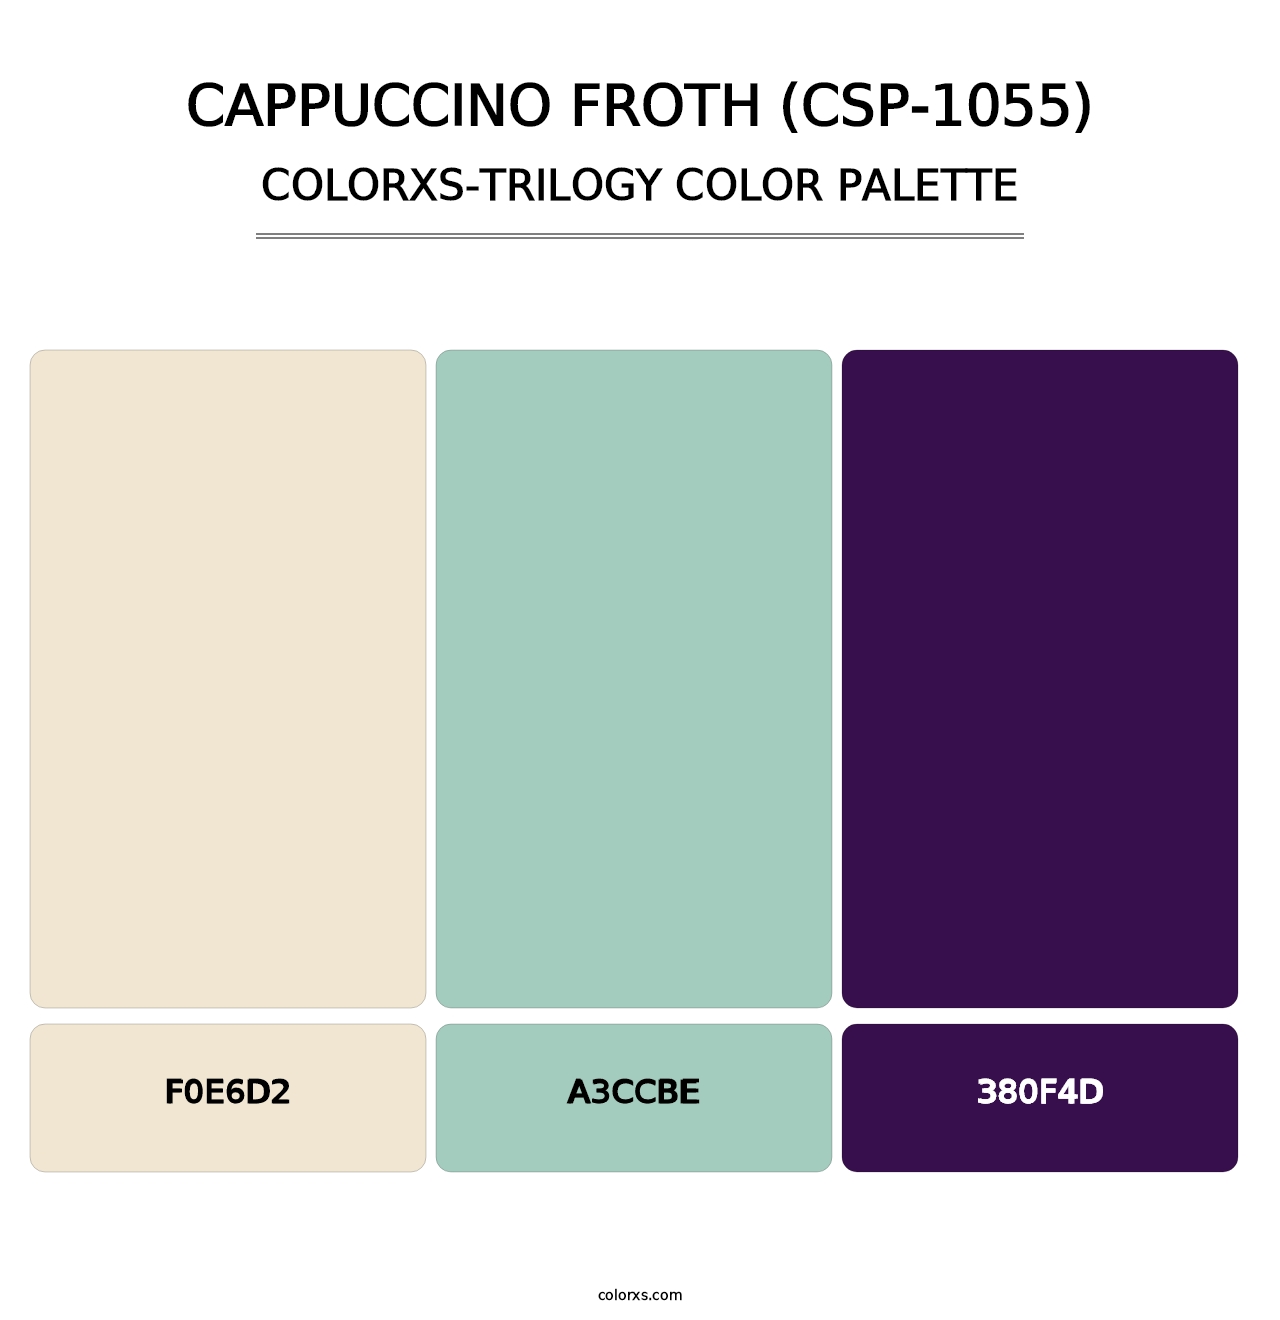 Cappuccino Froth (CSP-1055) - Colorxs Trilogy Palette